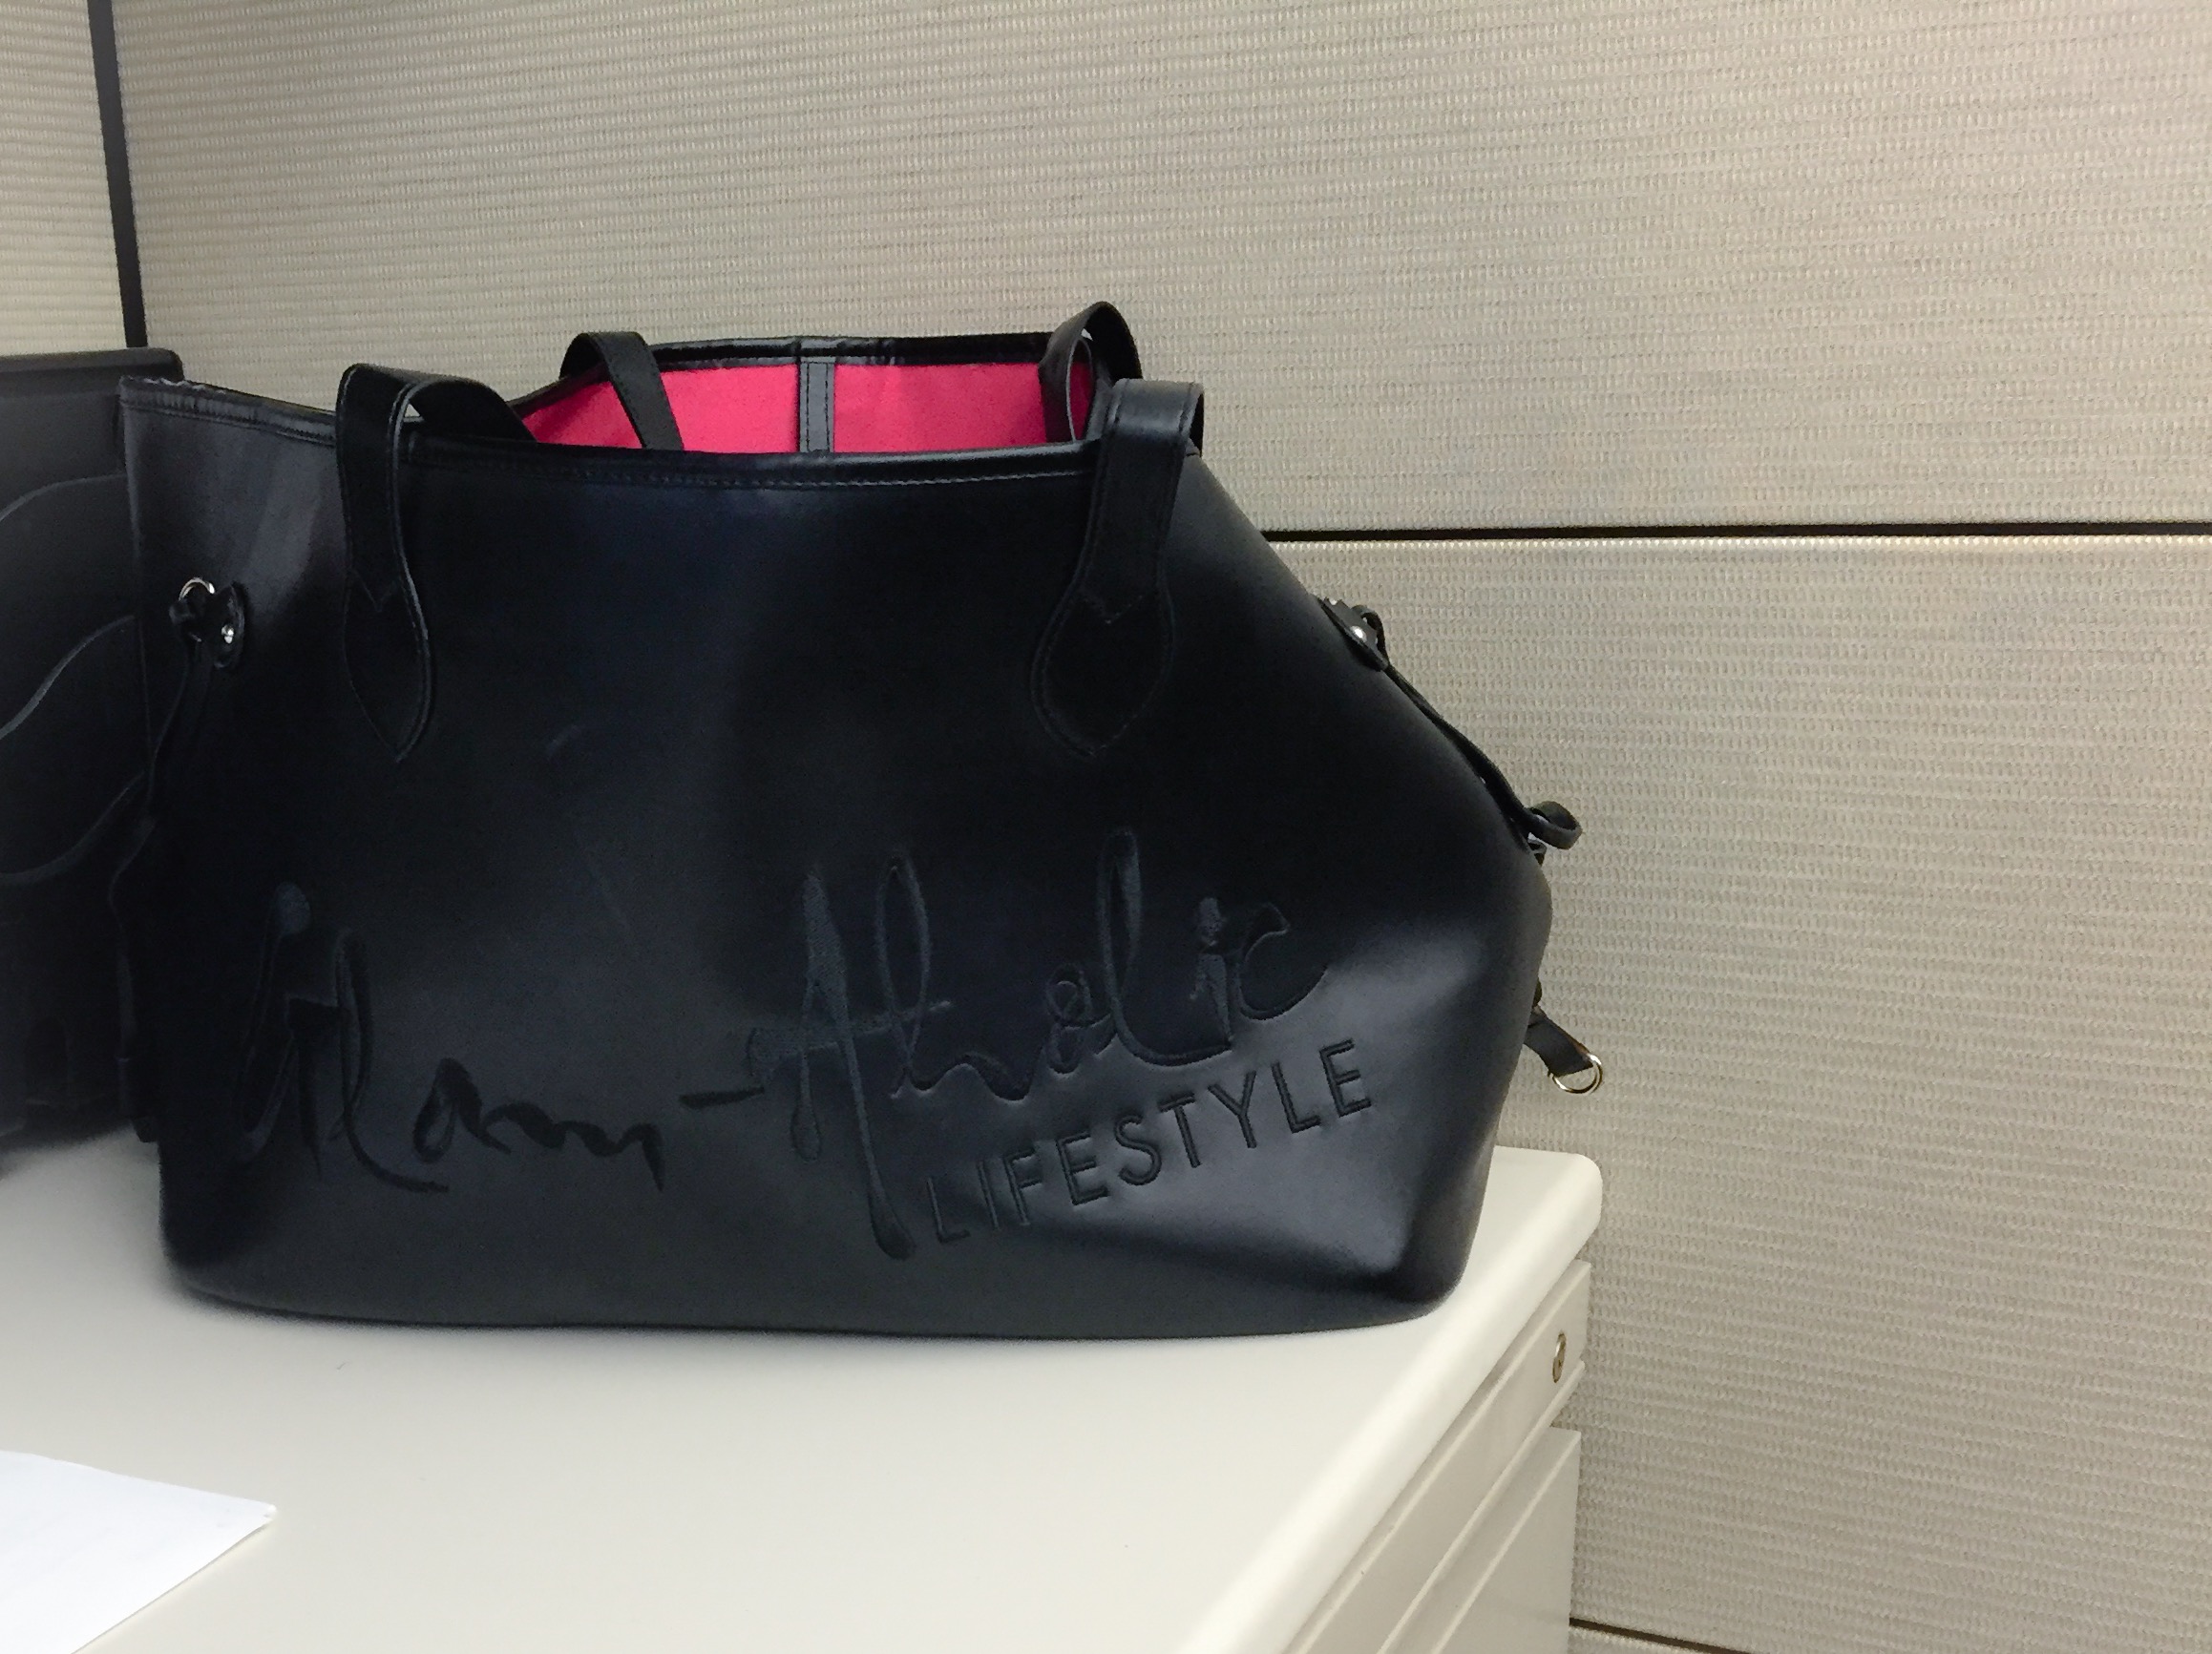 TOPSHELF ITEM OF THE DAY: MUVA MIA RAY'S LIMITED EDITION BLACK GLAM-AHOLIC  LIFESTYLE EVERYDAY TOTE